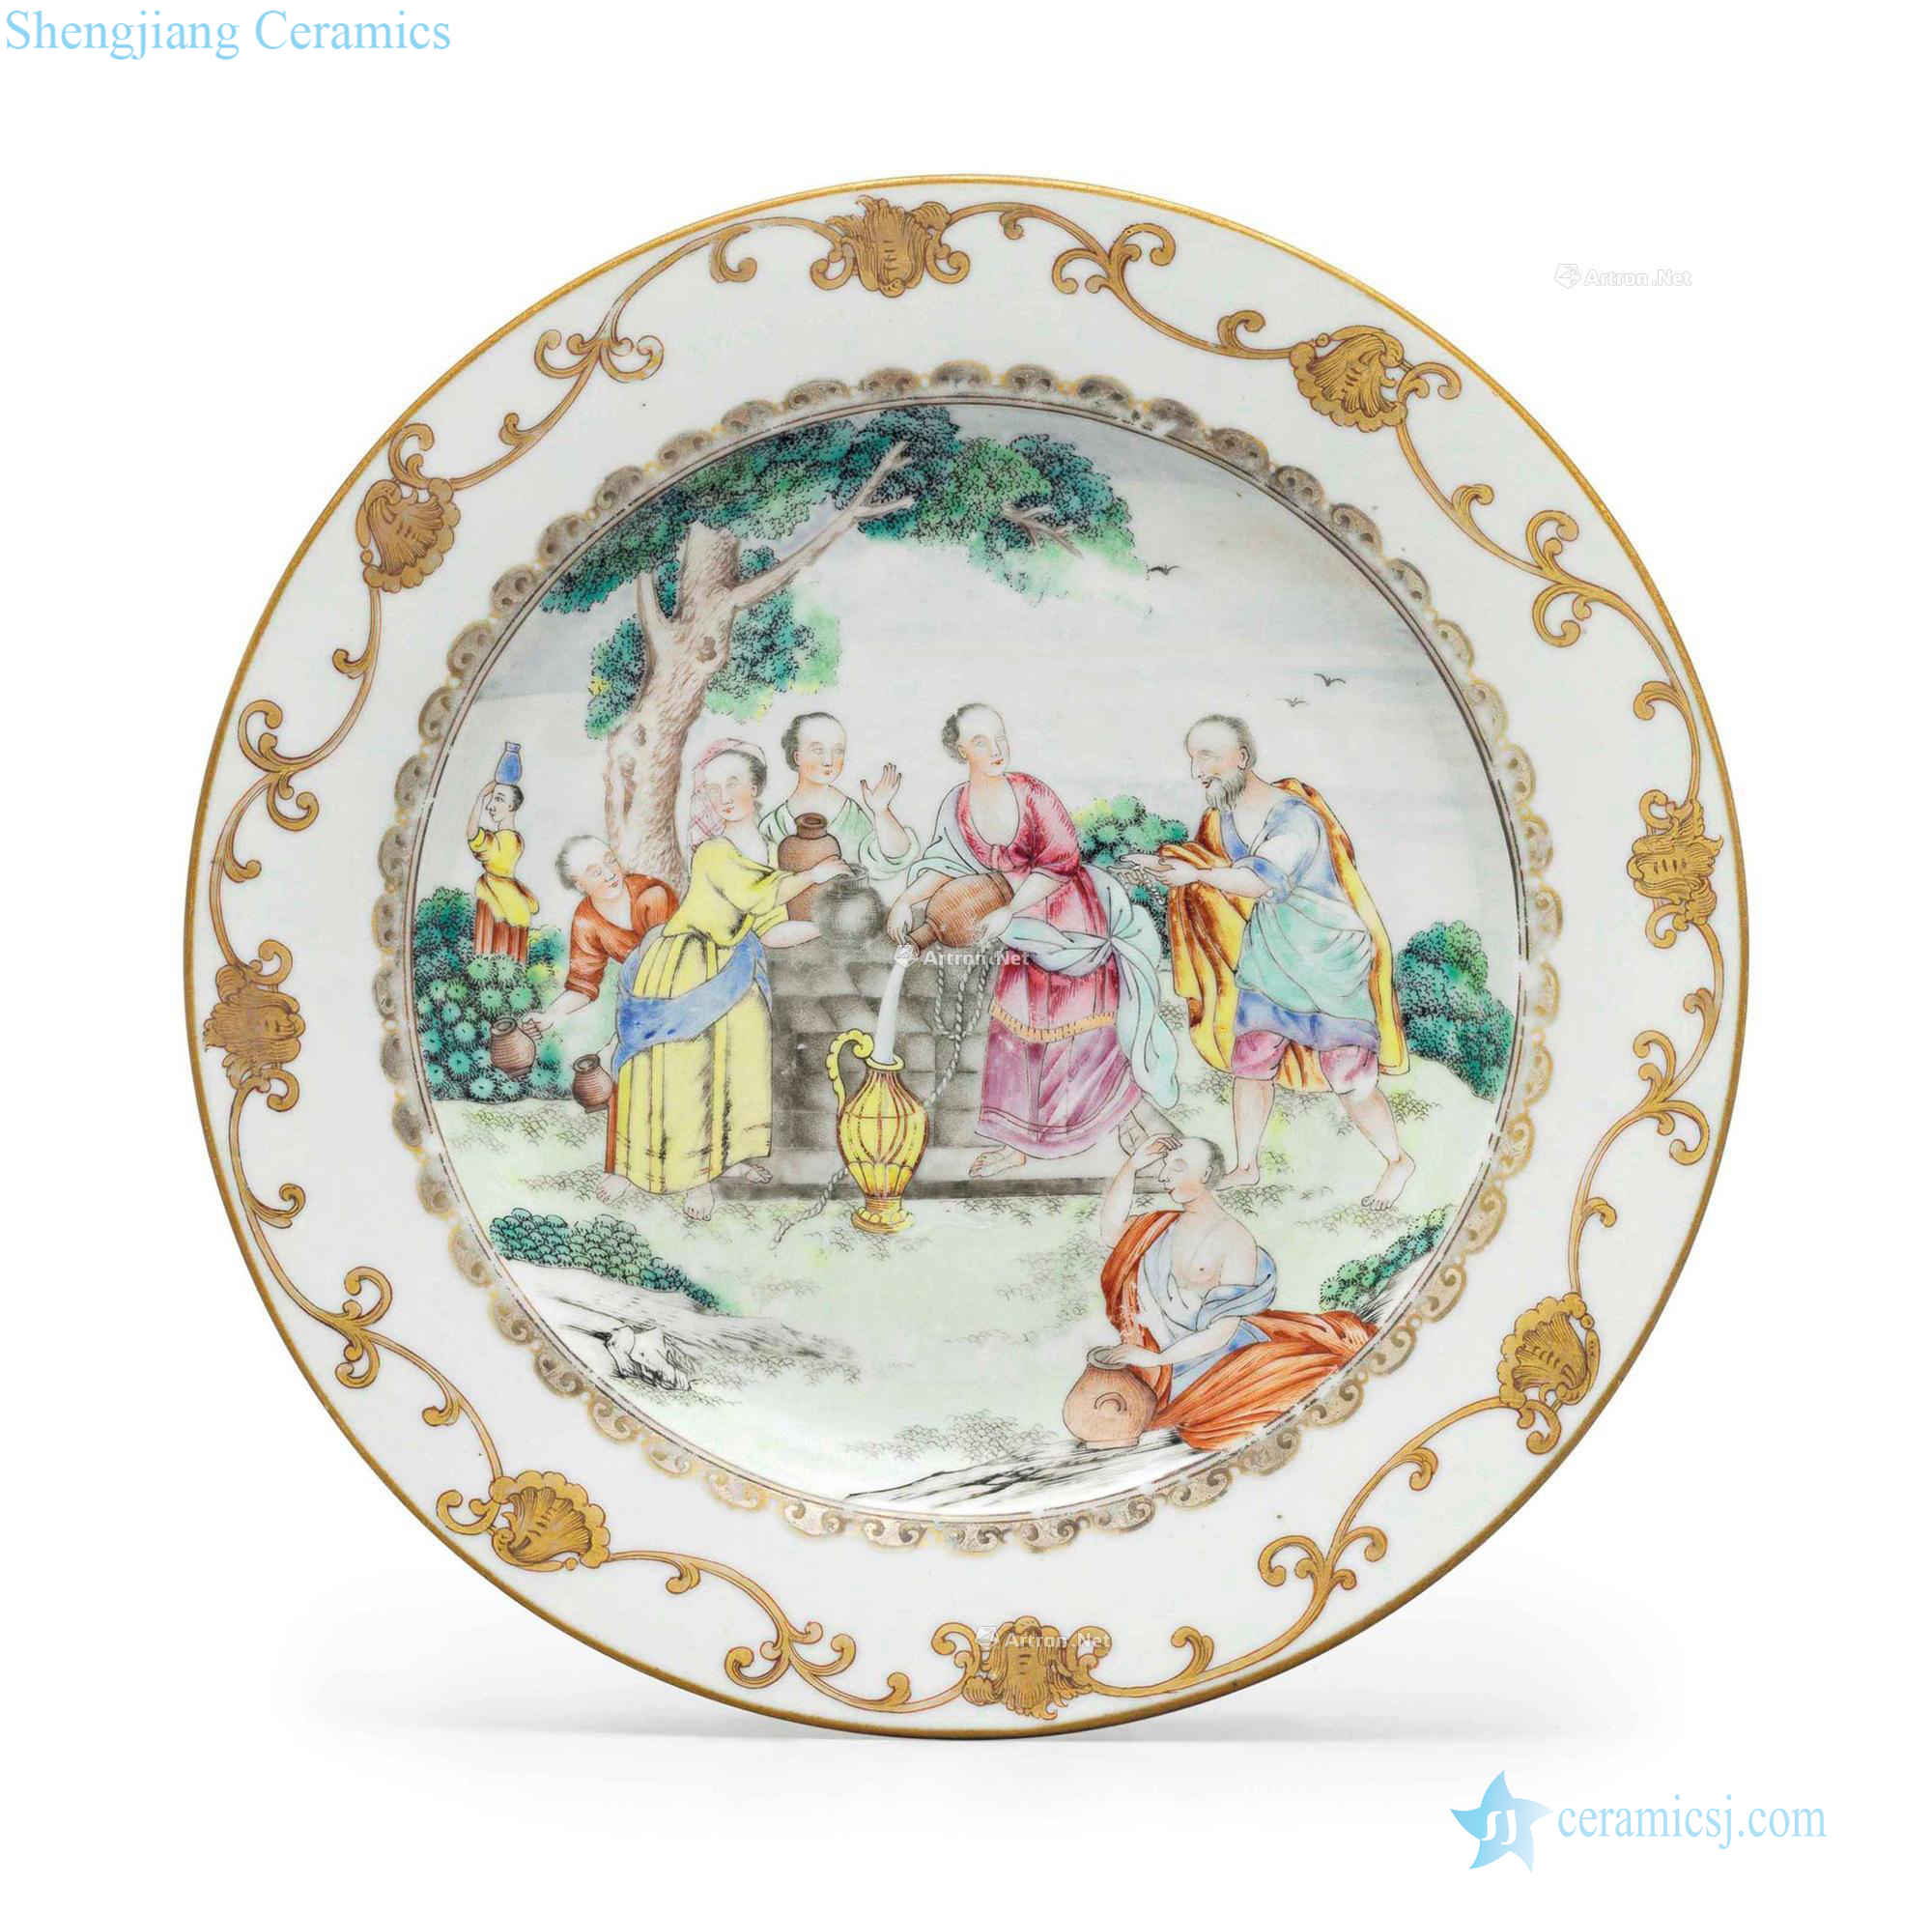 Qianlong period, about 1750 A FAMILLE ROSE 'REBECCA AT THE WELL PLATE